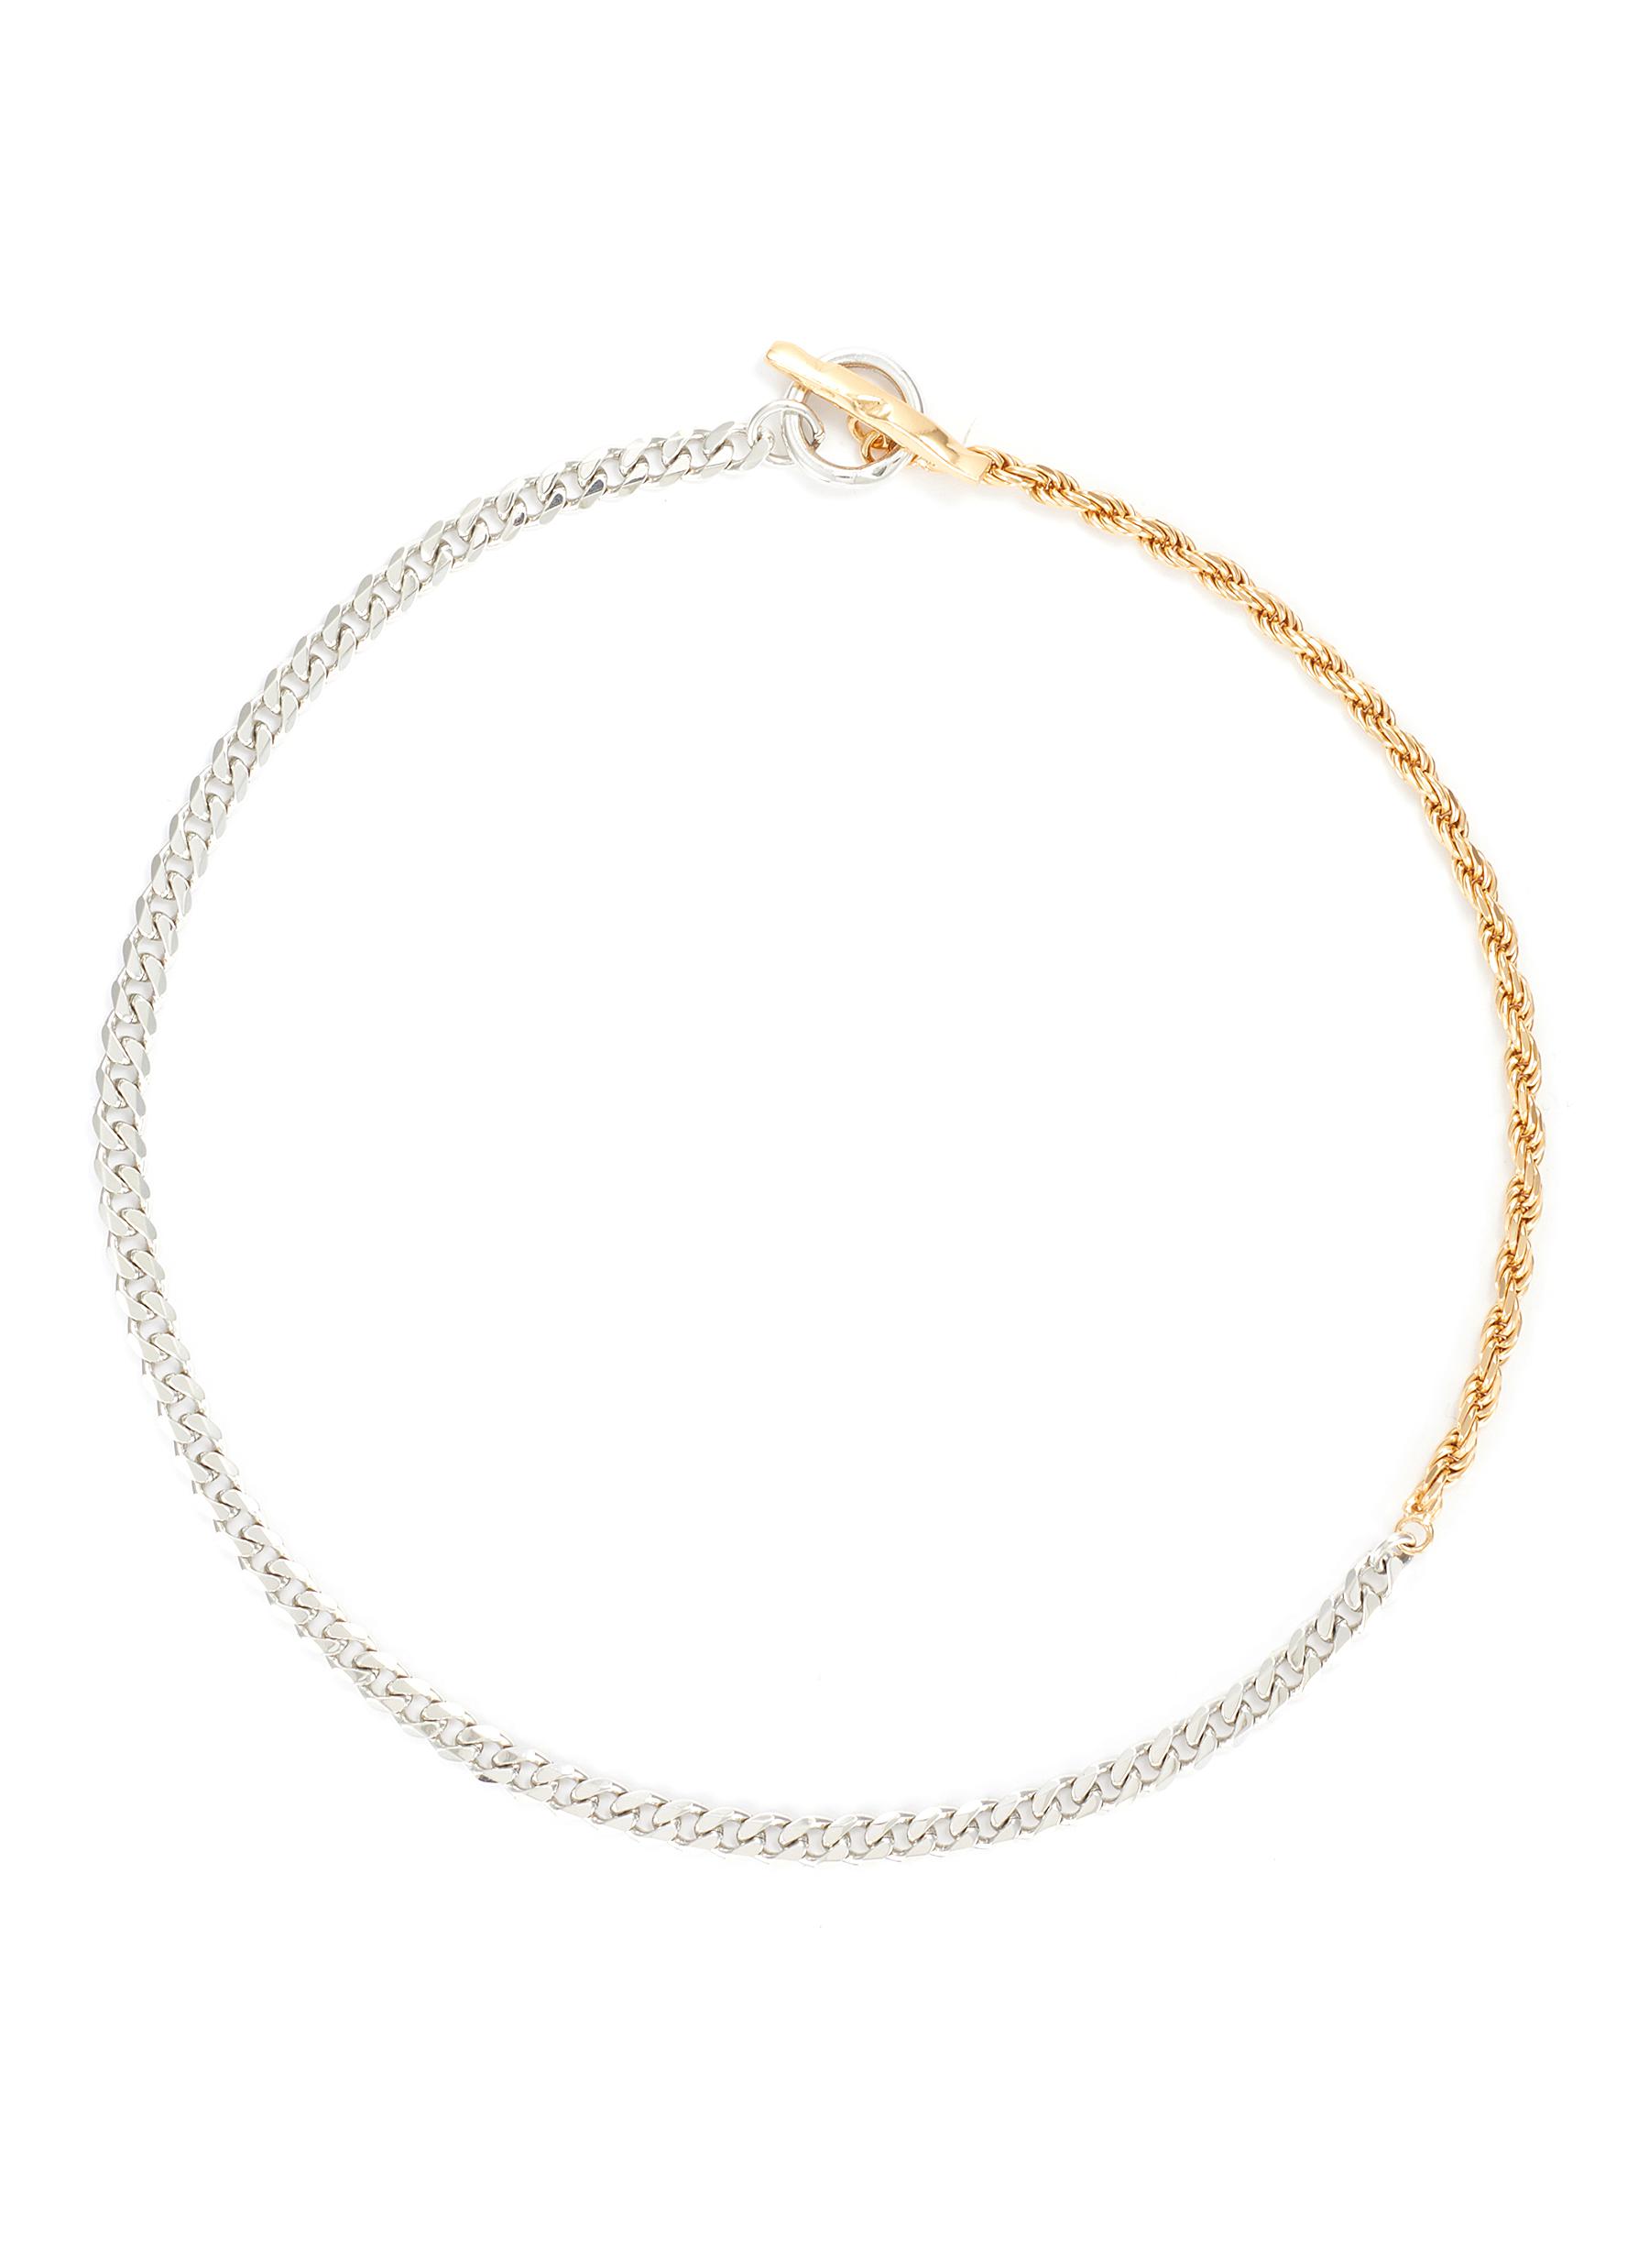 GOLD TWIST ANGLED SILVER CURB NECKLACE